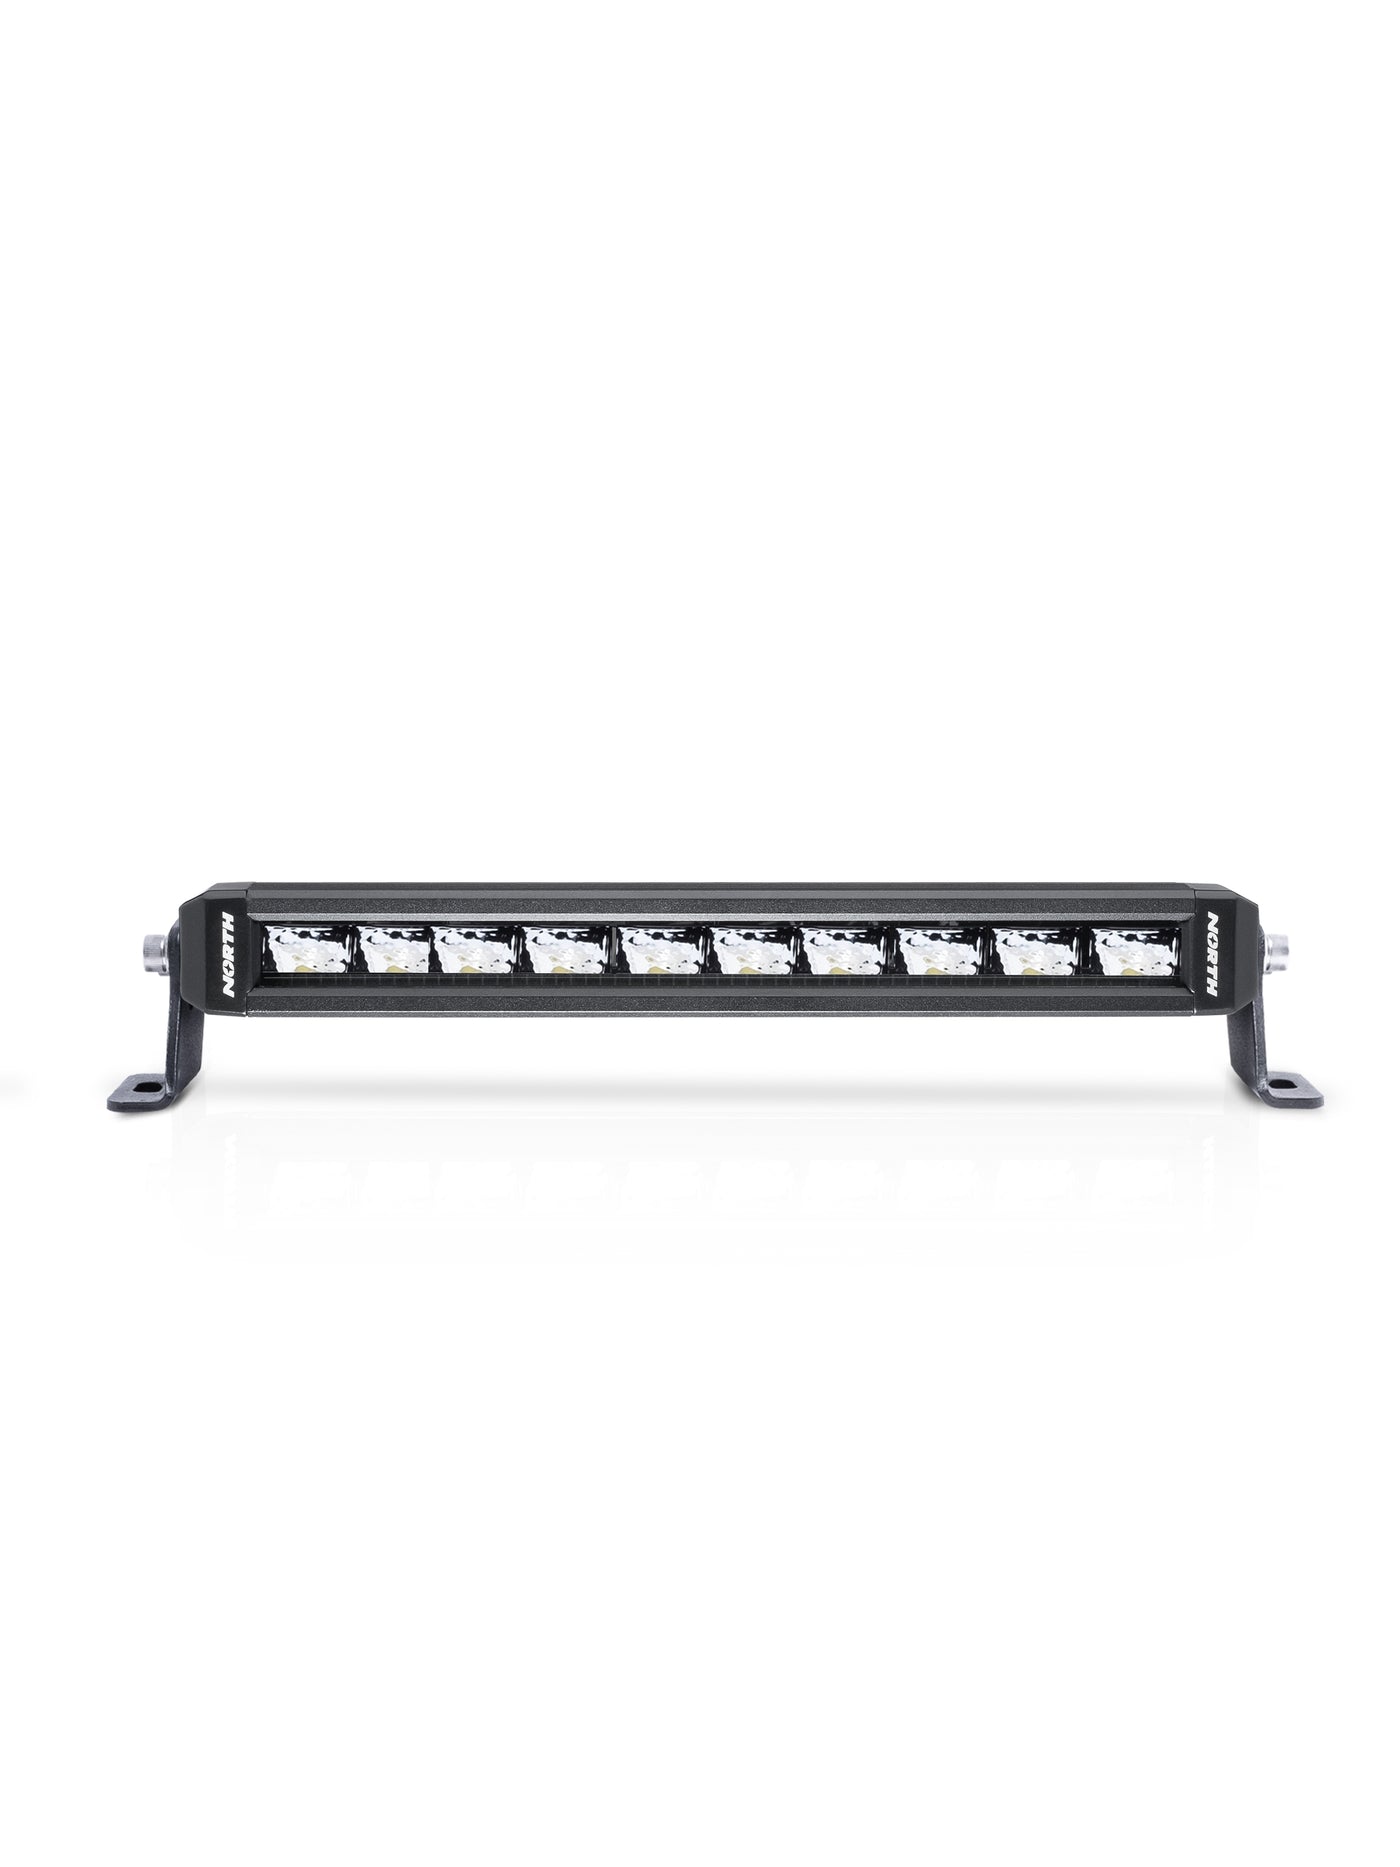 10" RGB-W Light Bar with Backlight Colors - North Lights